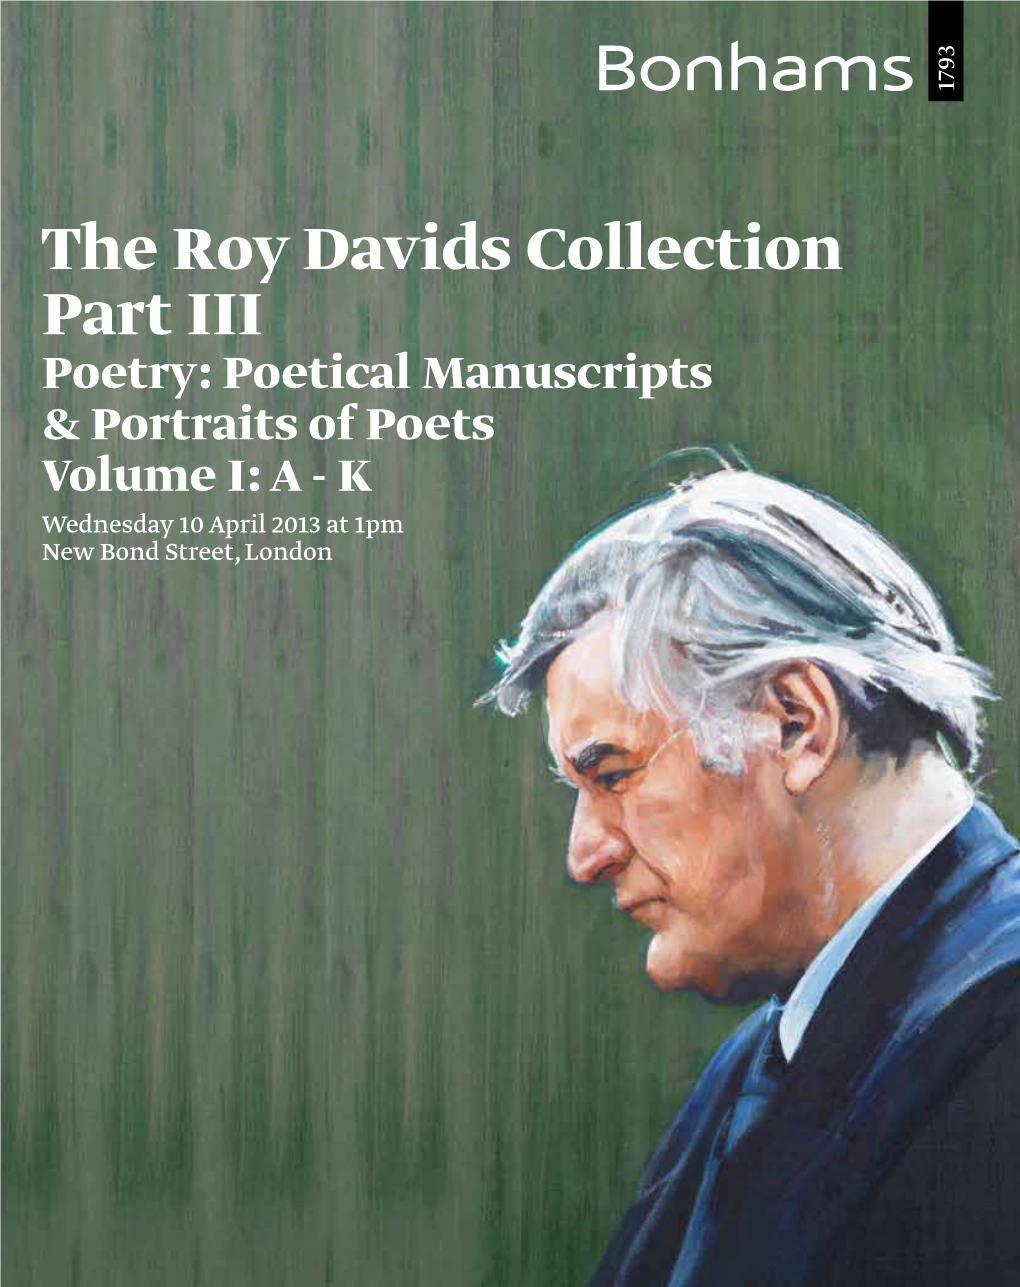 The Roy Davids Collection Part III Poetry: Poetical Manuscripts and Portraits of Poets Volume I